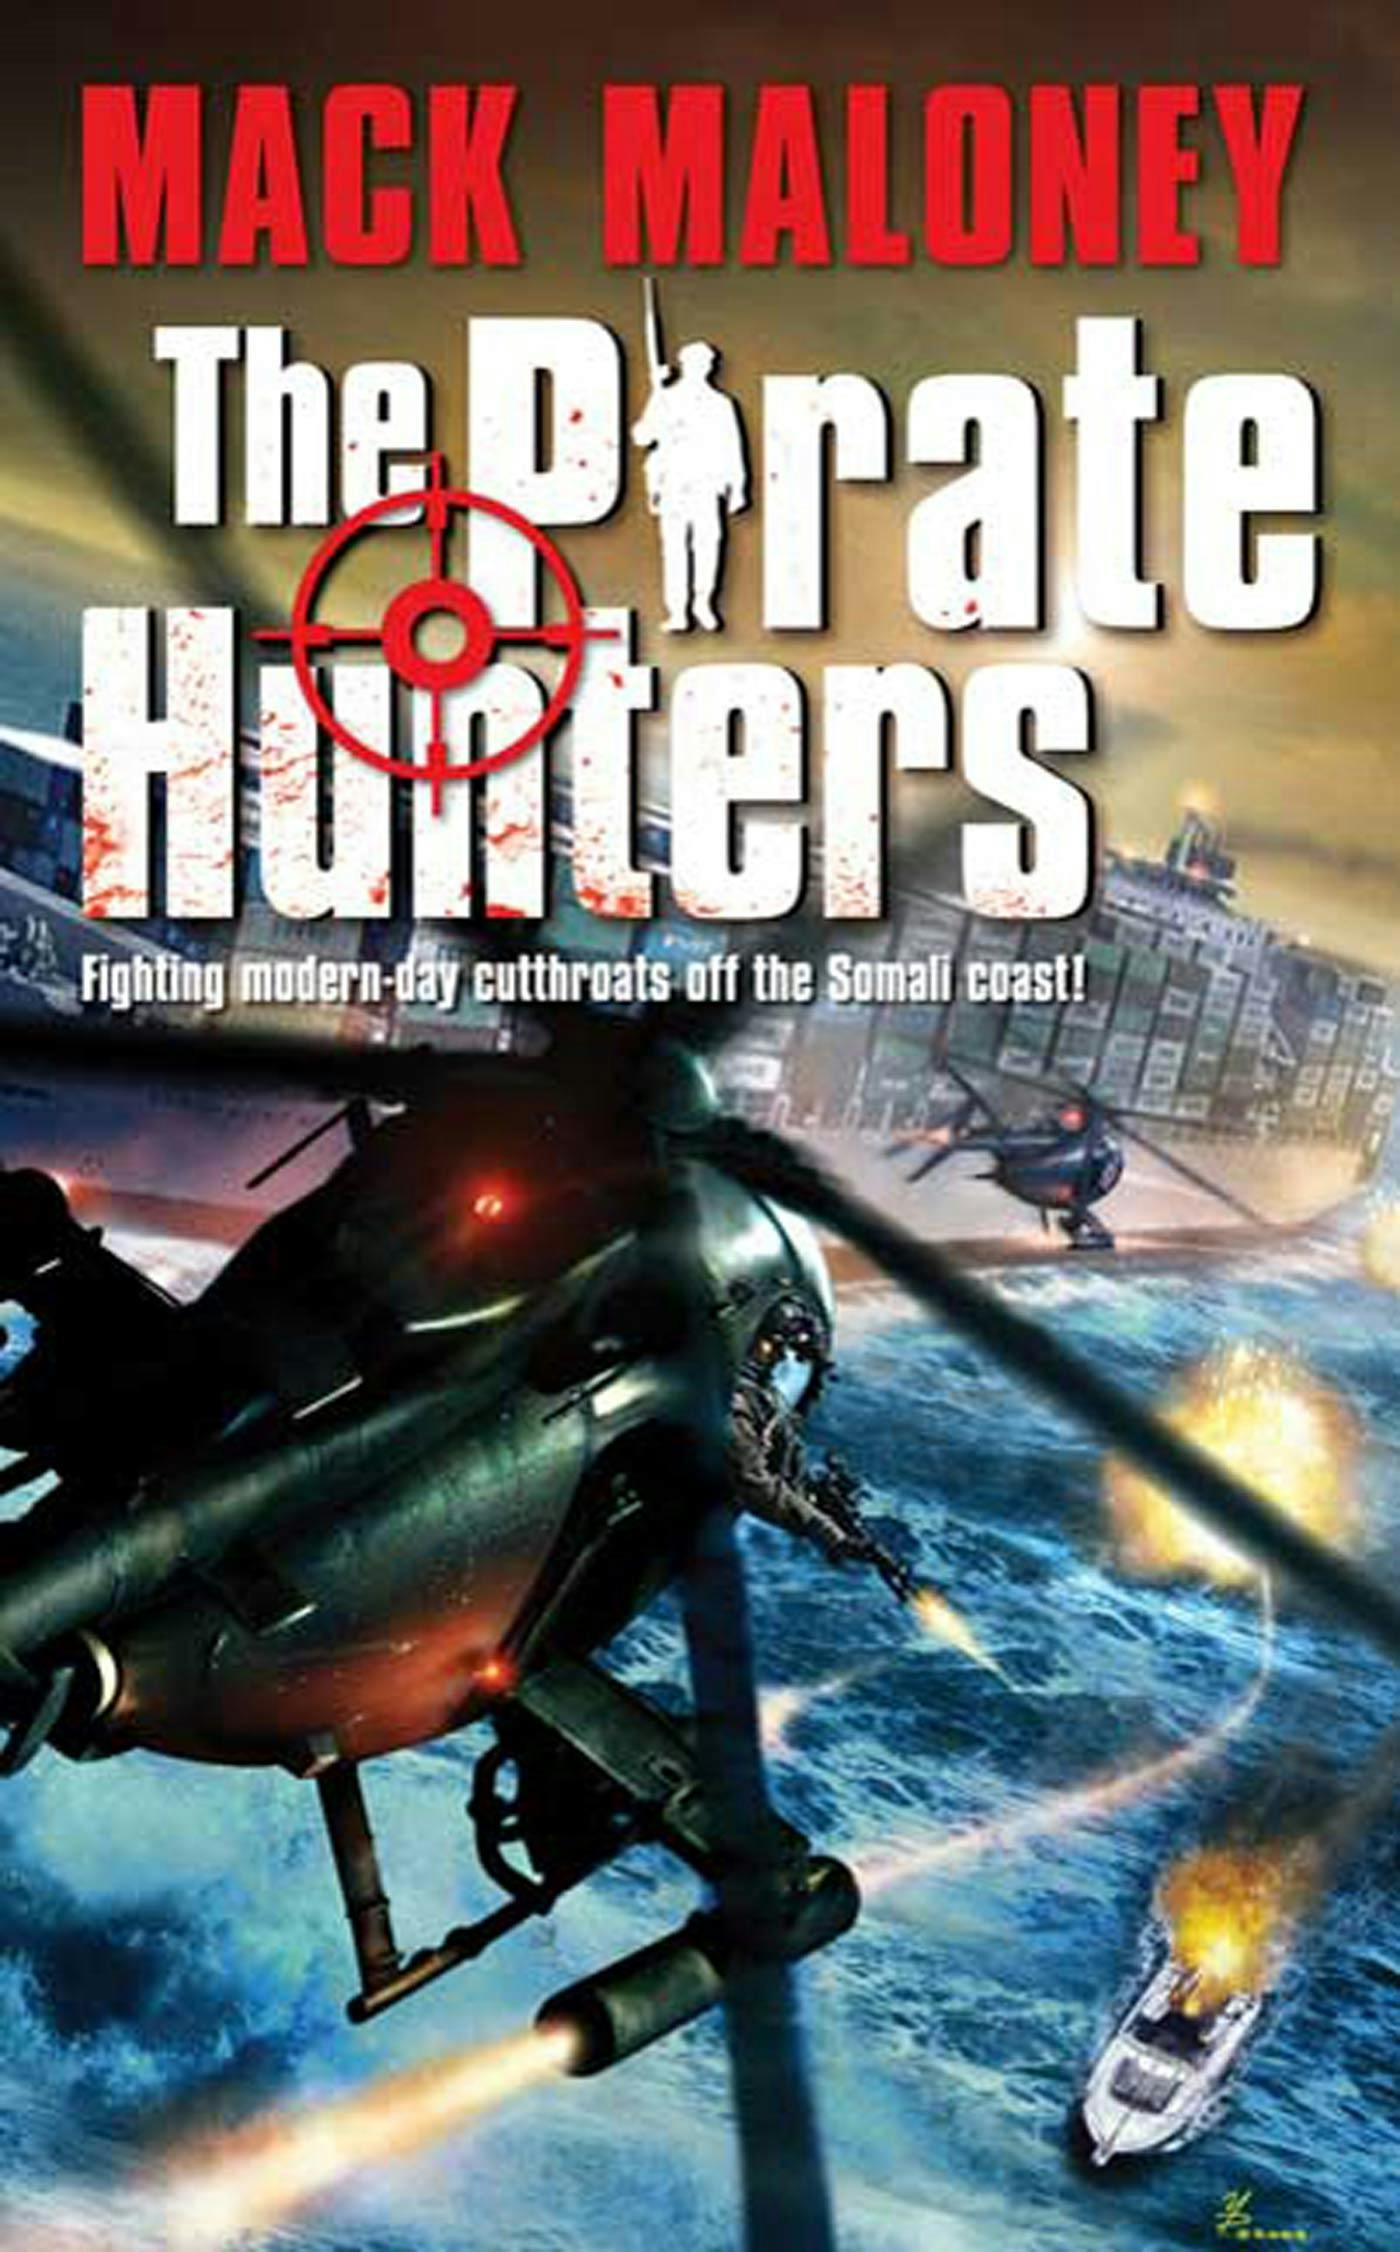 Cover for the book titled as: The Pirate Hunters